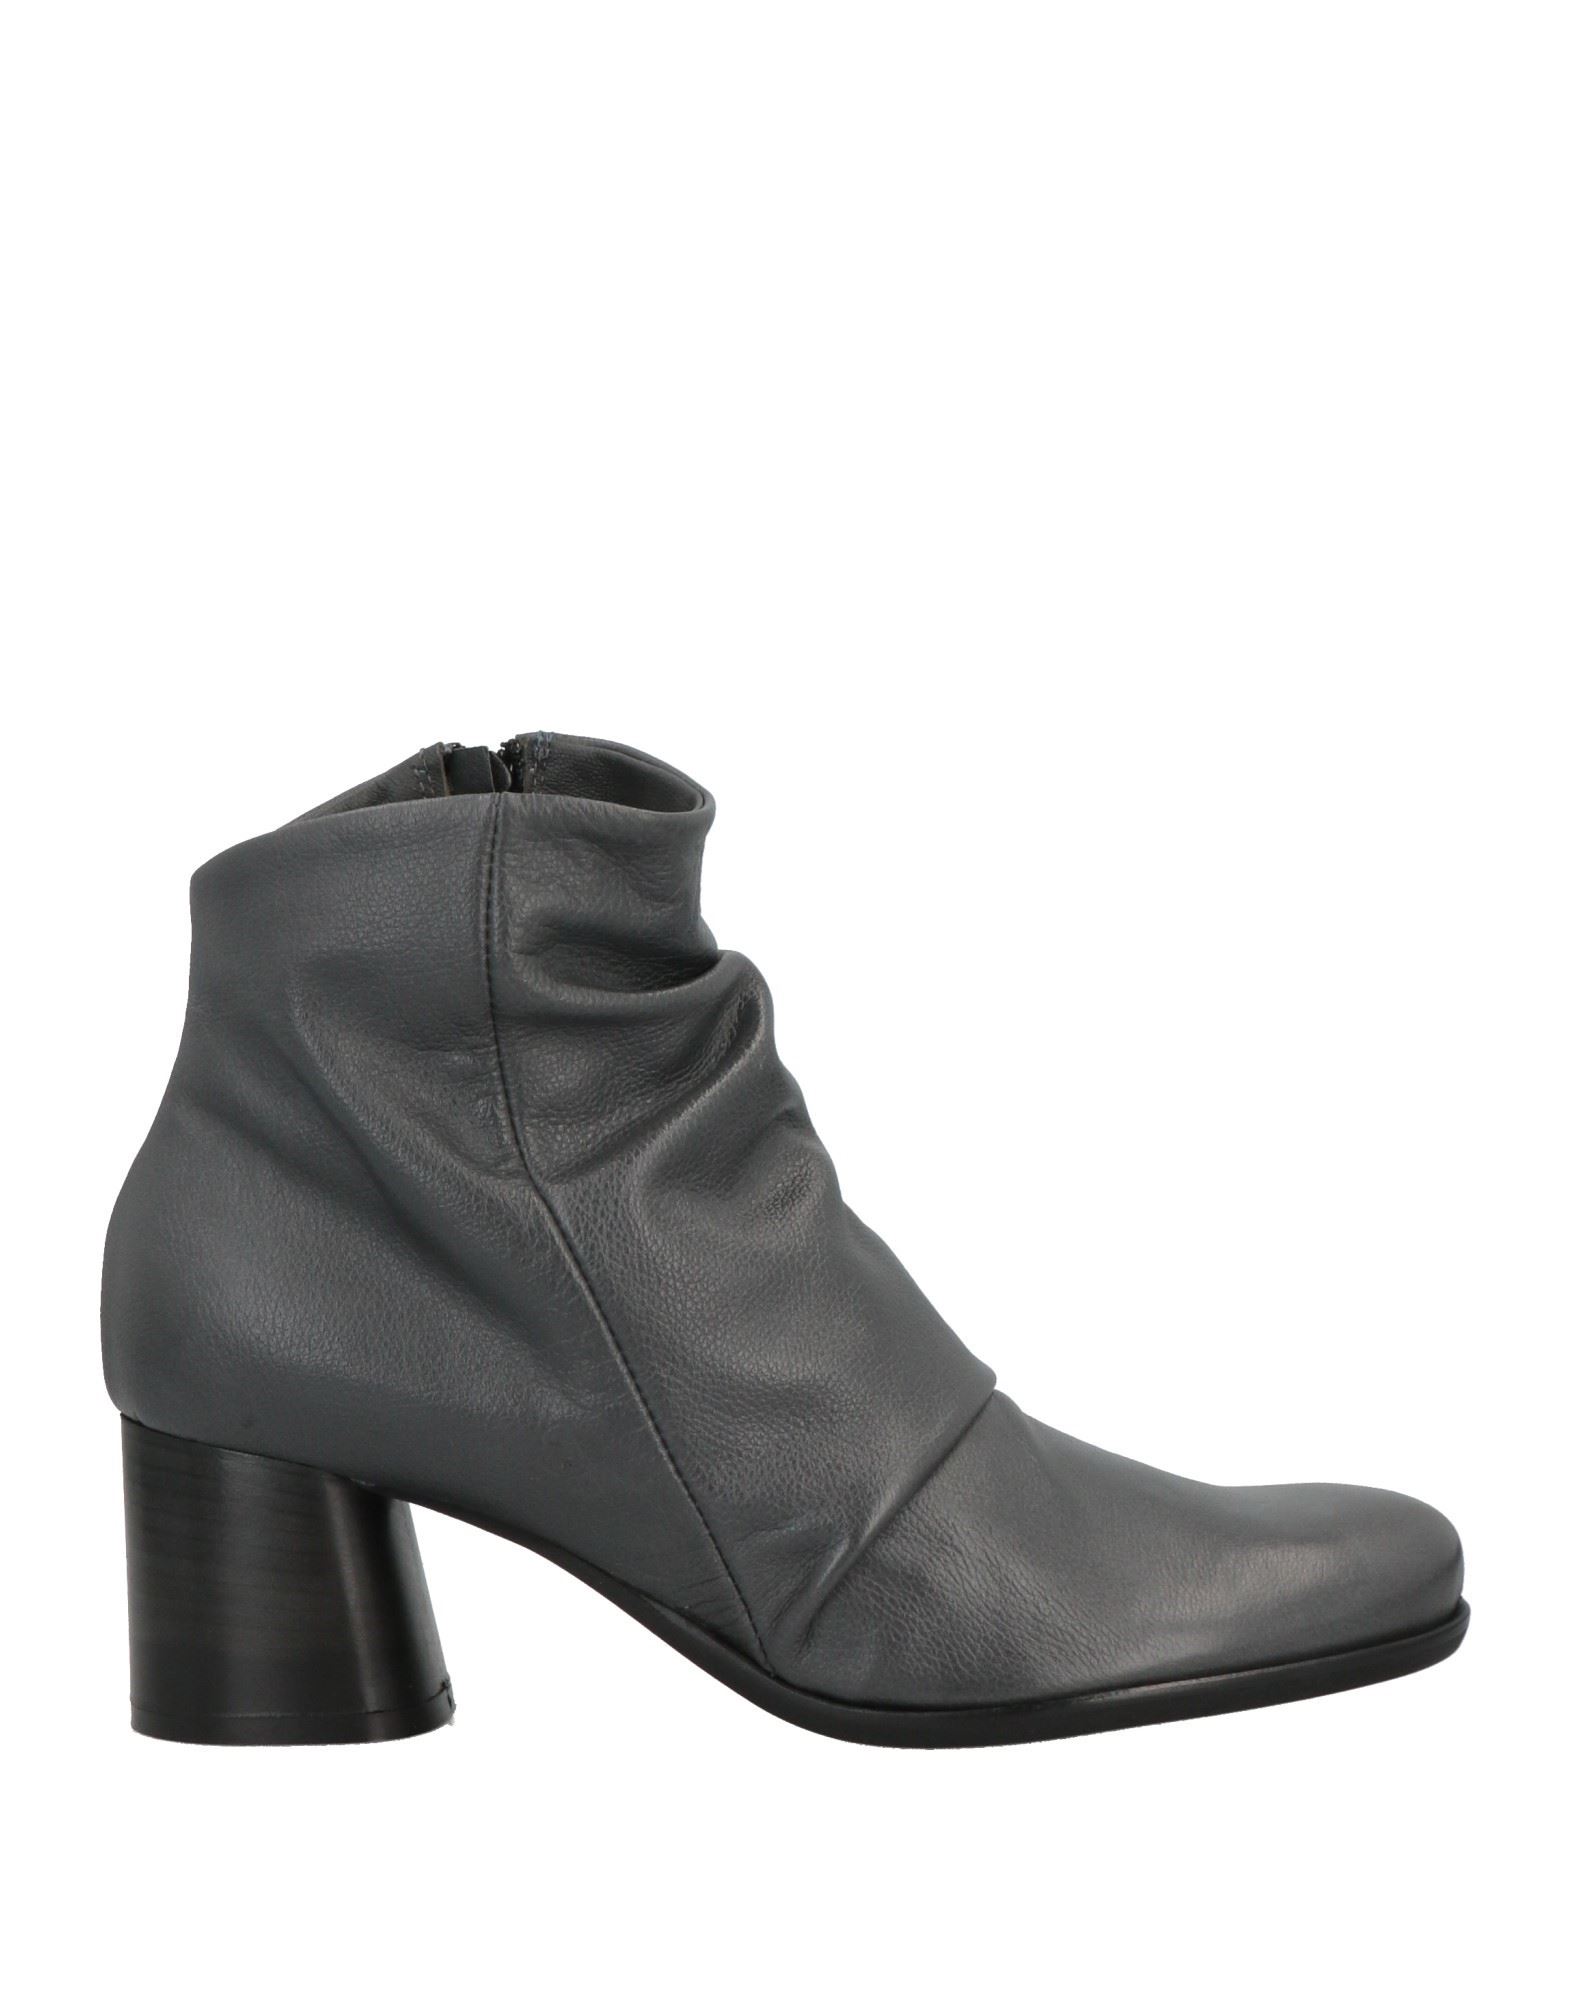 LILIMILL LILIMILL WOMAN ANKLE BOOTS LEAD SIZE 9 SOFT LEATHER